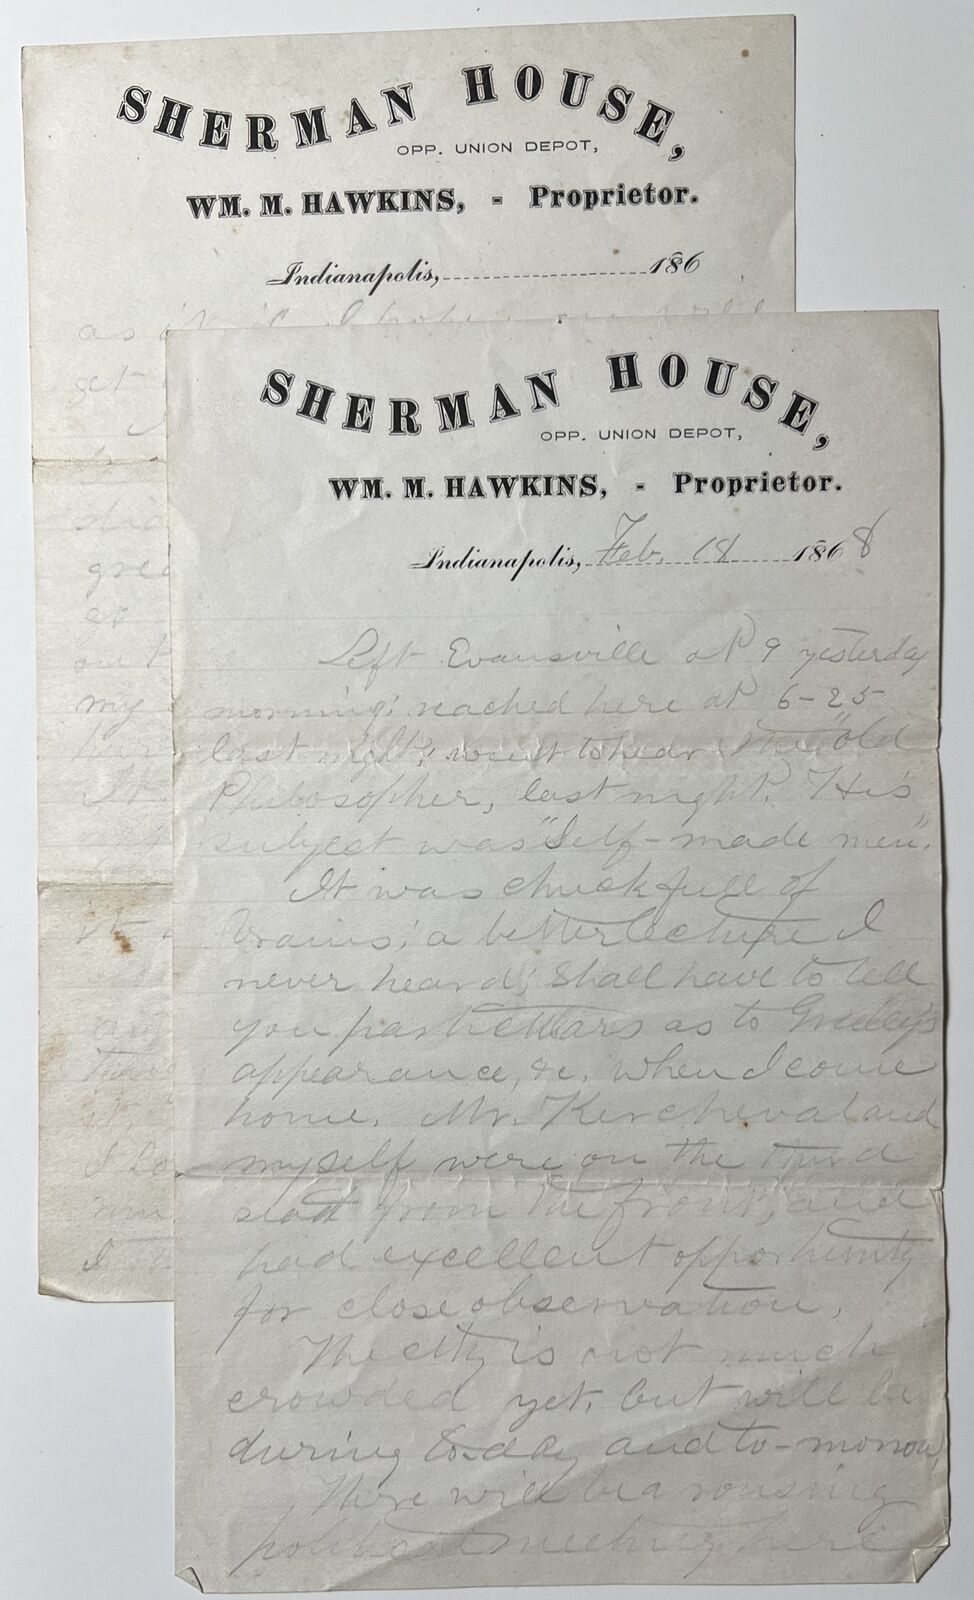 Antique 1868 SHERMAN HOUSE Inn Lodging Letter  Indianapolis Indiana 2 Pages